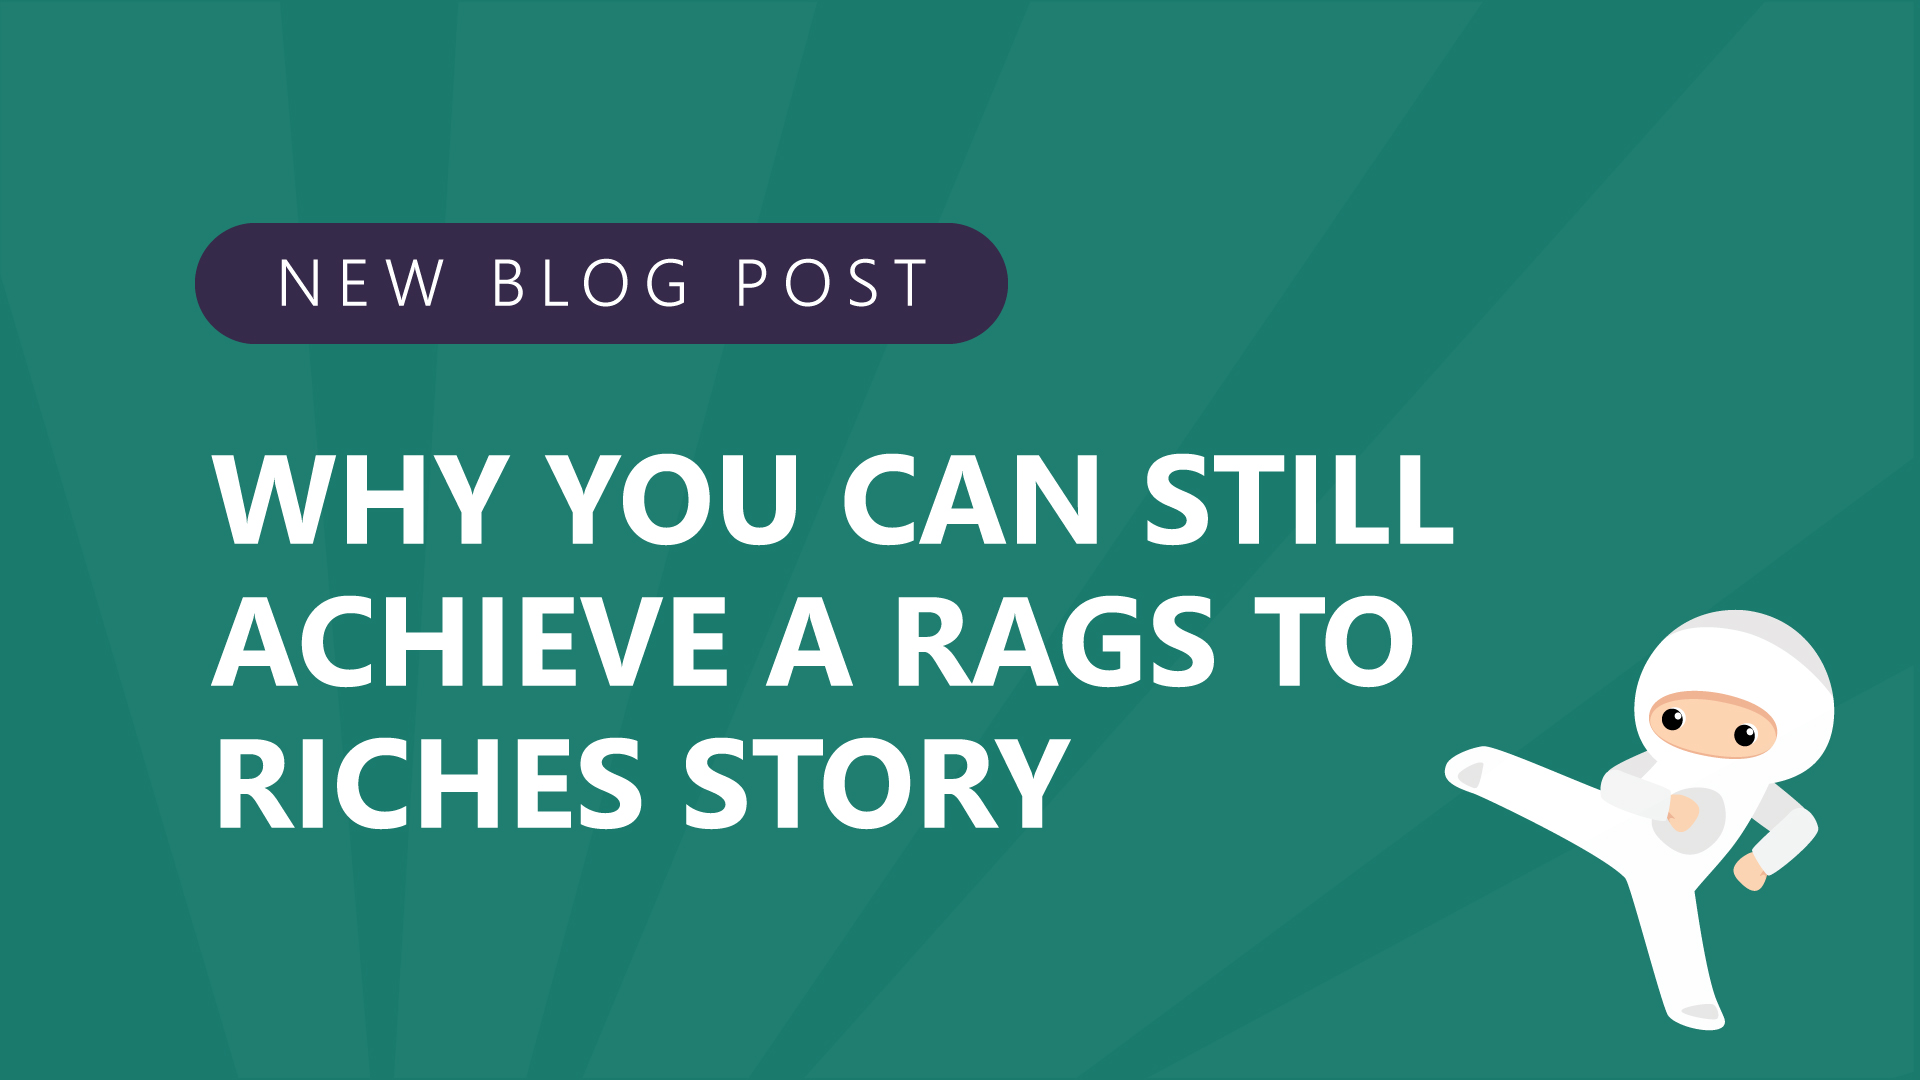 6 why you can still achieve a rags to riches story